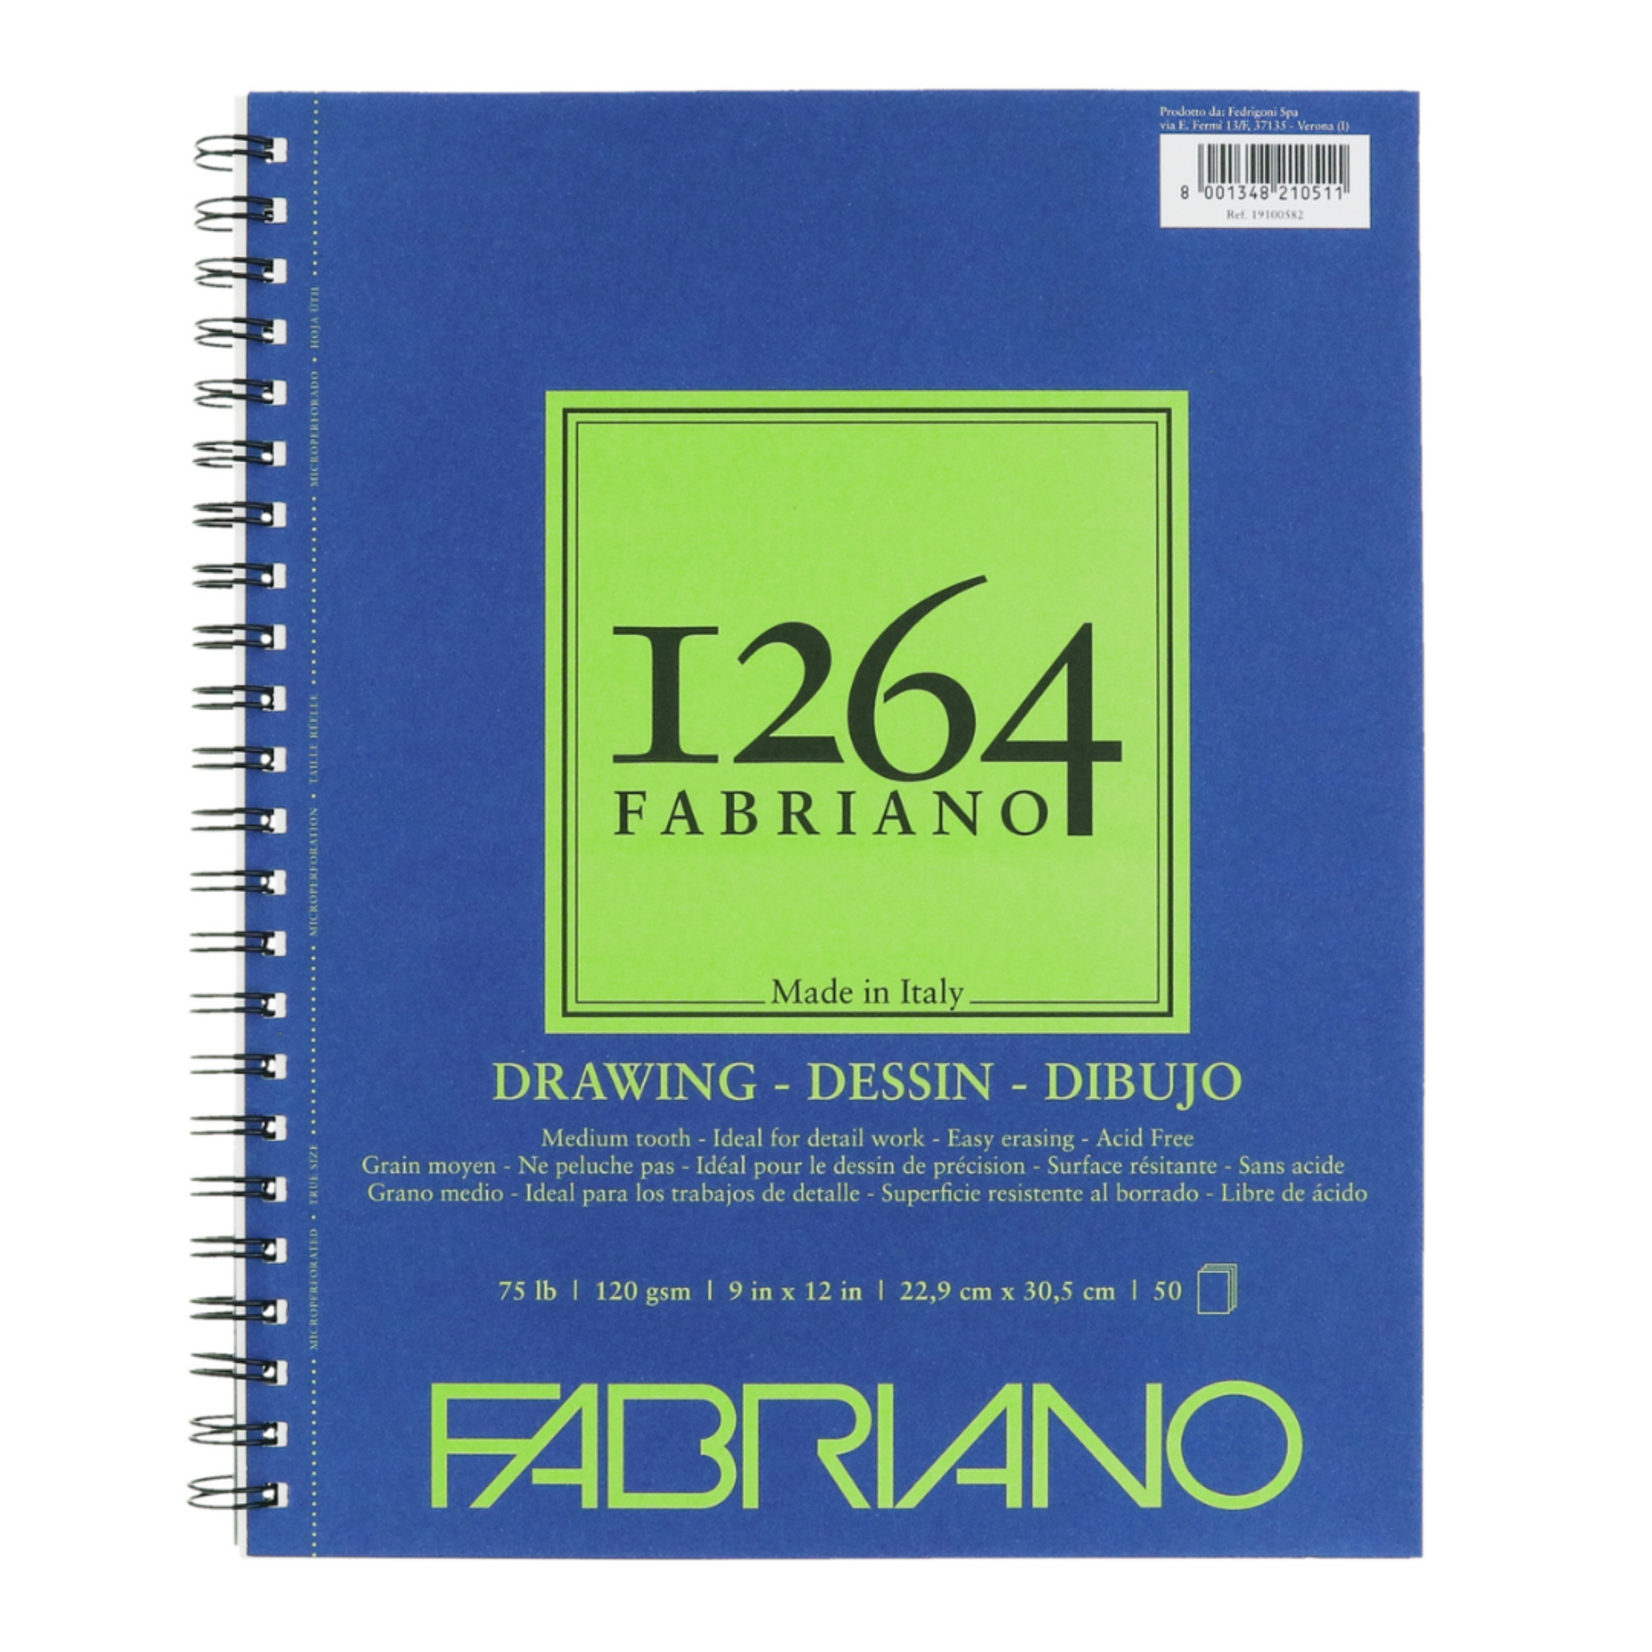 FABRIANO 1264 DRAWING 75LB 9X12 50/SH COIL BOUND